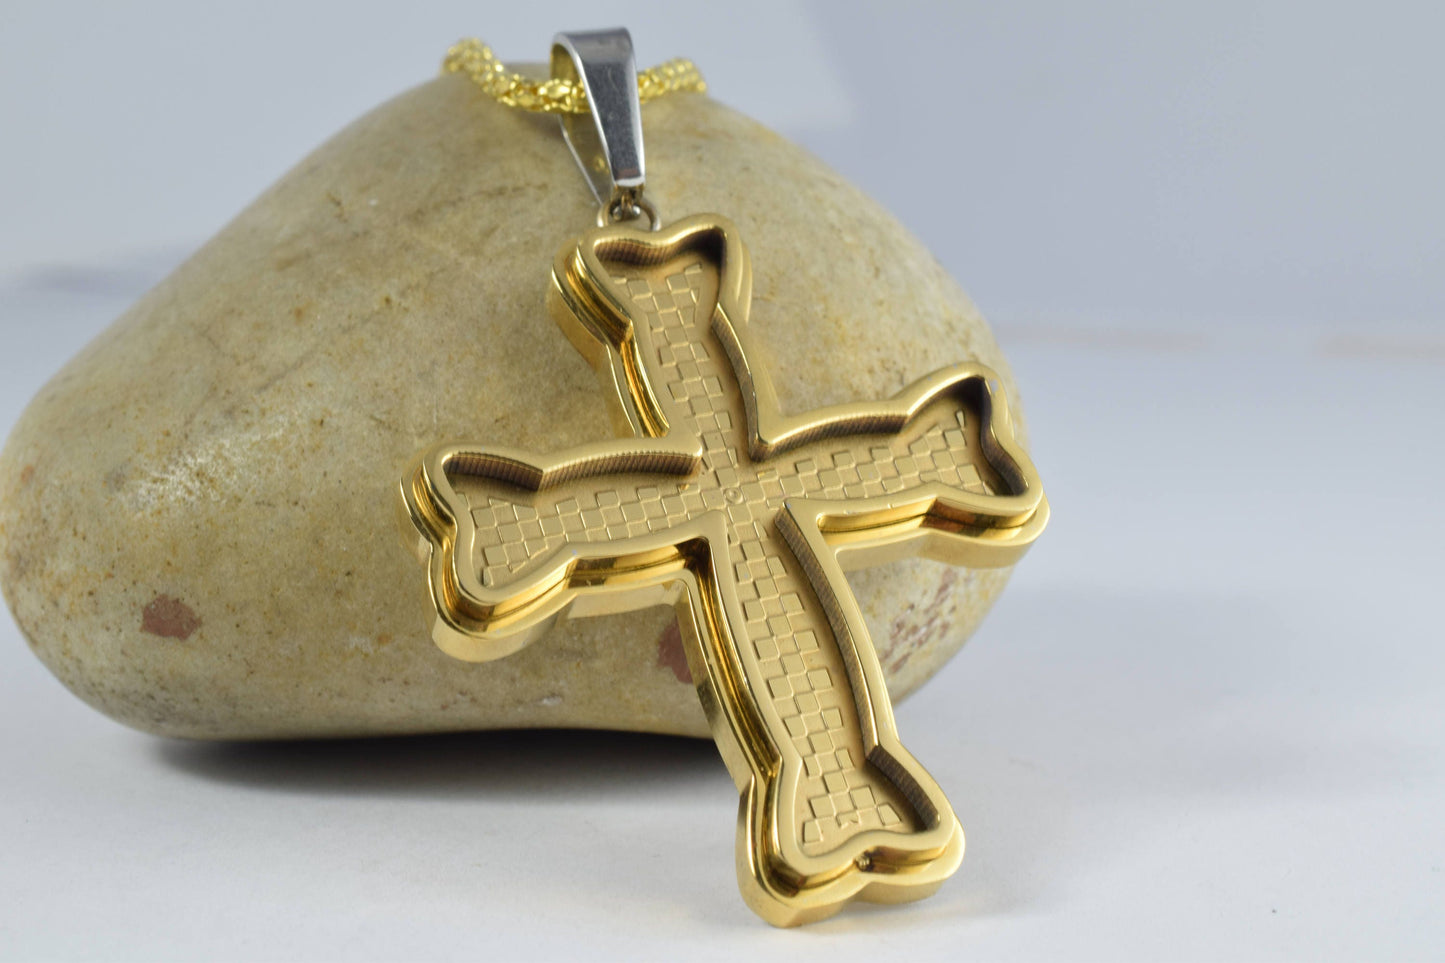 18K Gold Filled Cross Pendant Stainless Steel Size 45x36mm, Thickness 4.5mm Christian Religious Cross For Jewelry Making